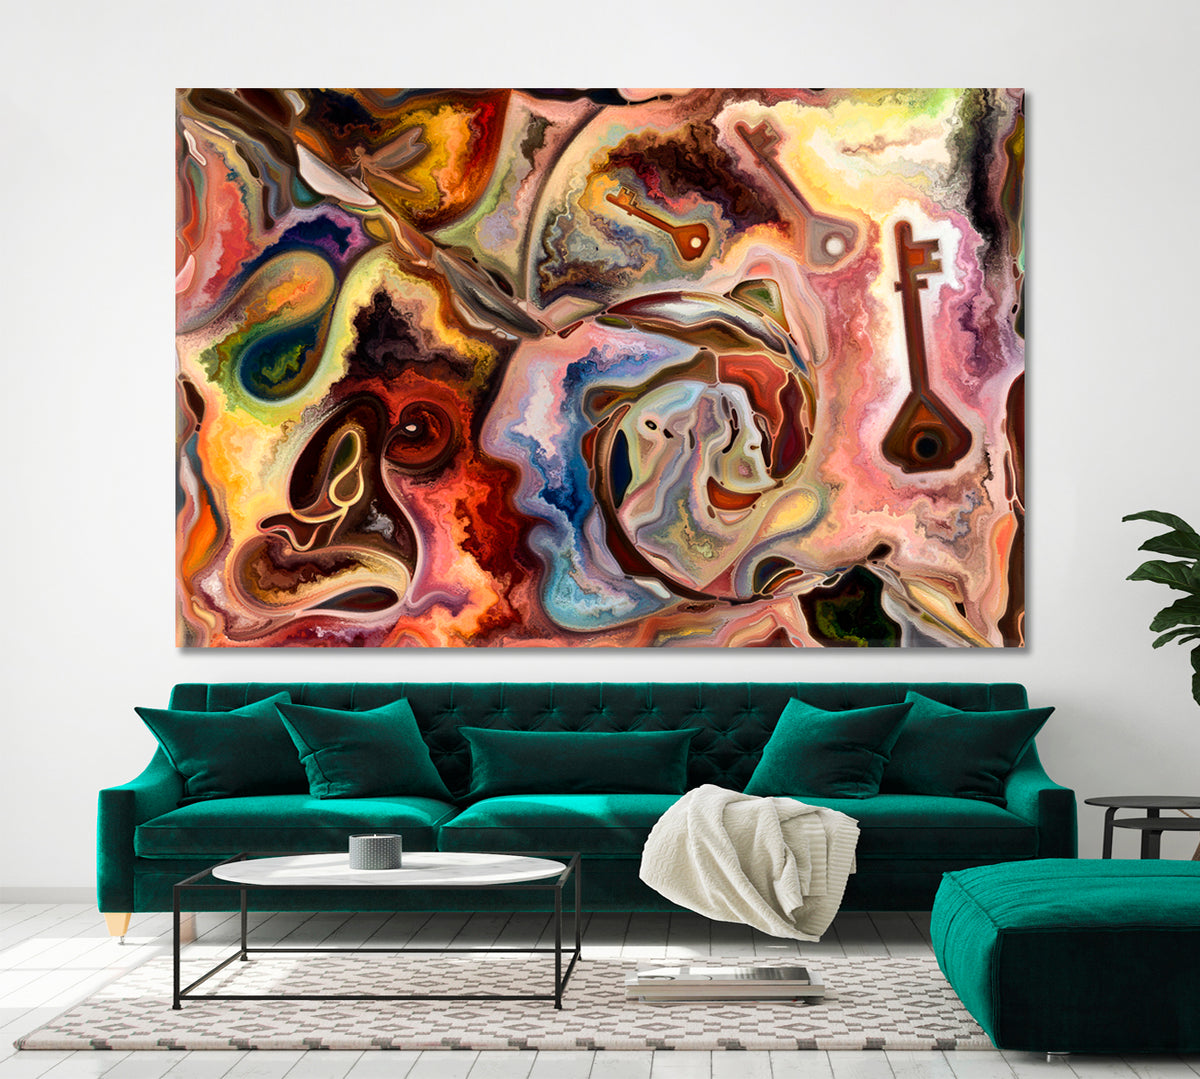 LOVE OF NATURE Abstract Contemporary Design Consciousness Art Artesty 1 panel 24" x 16" 